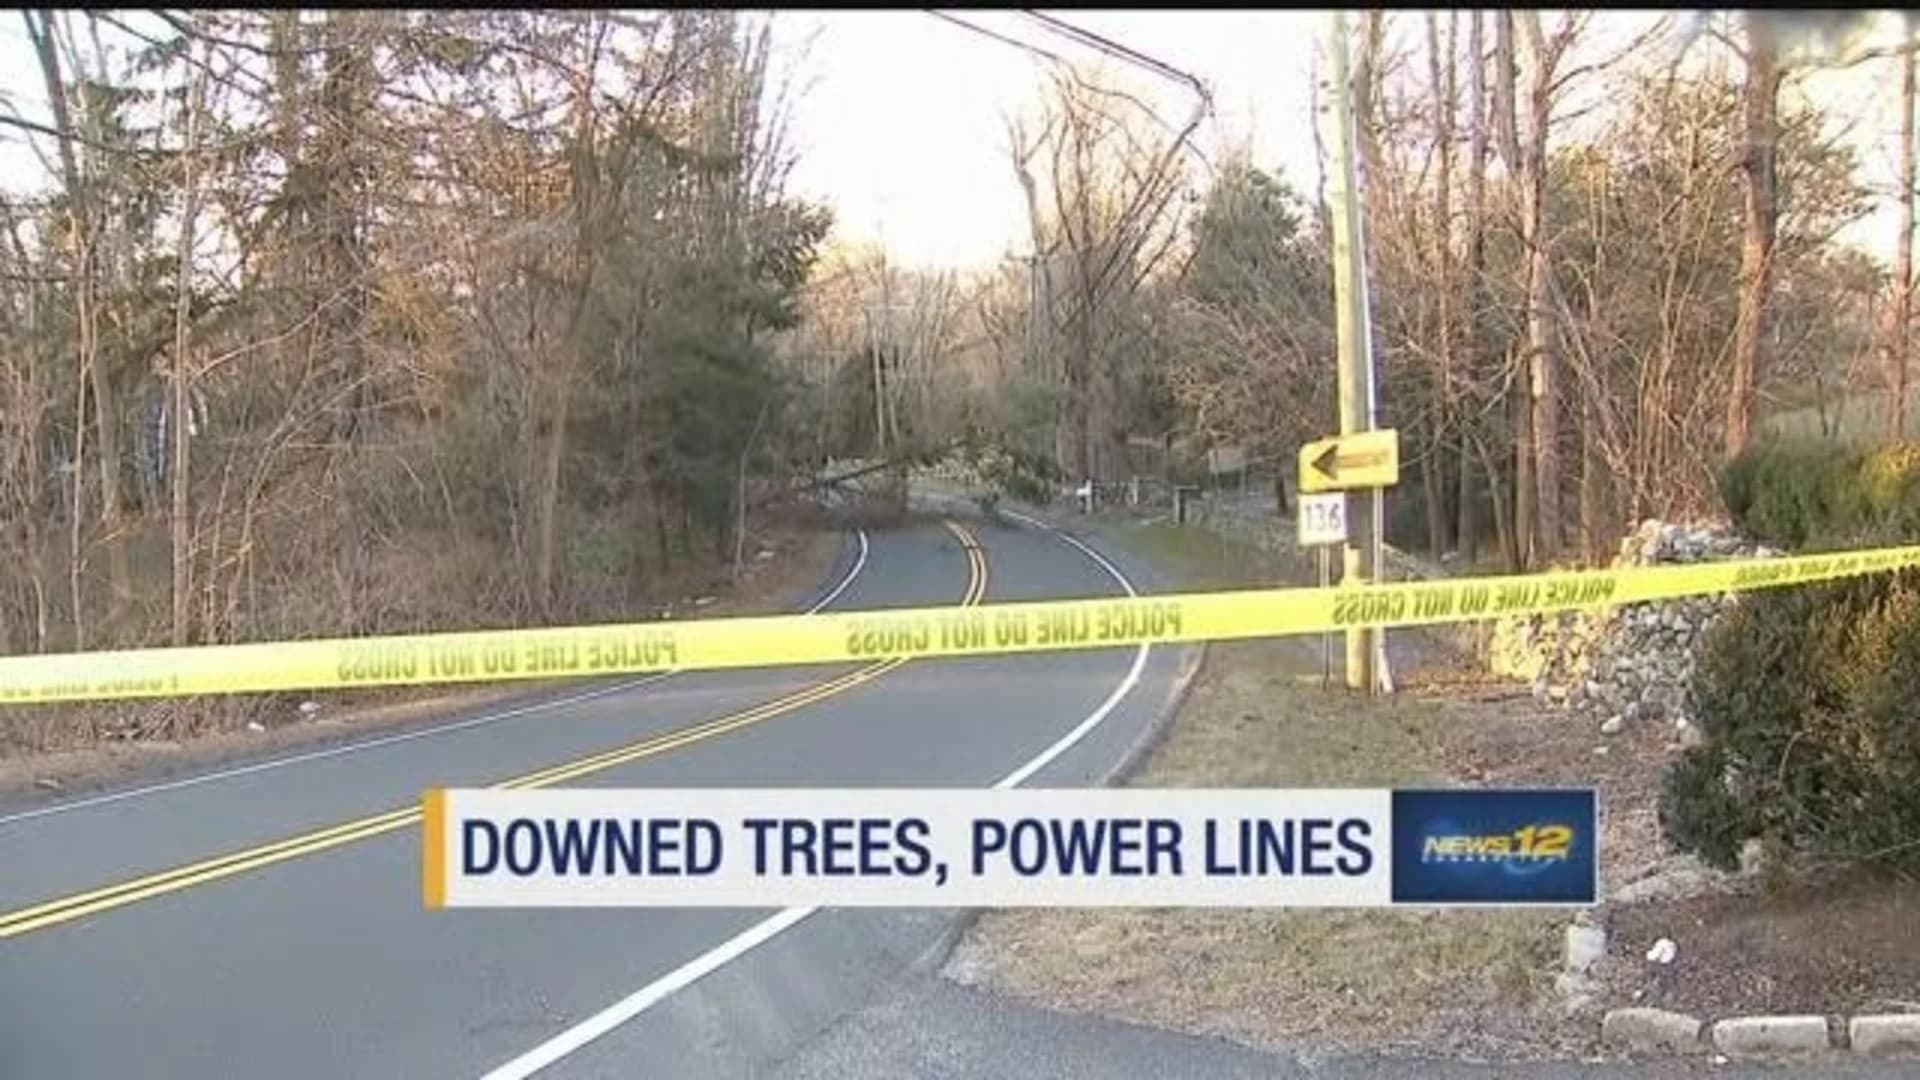 Wind gusts leave trees, powerlines down across state roadways